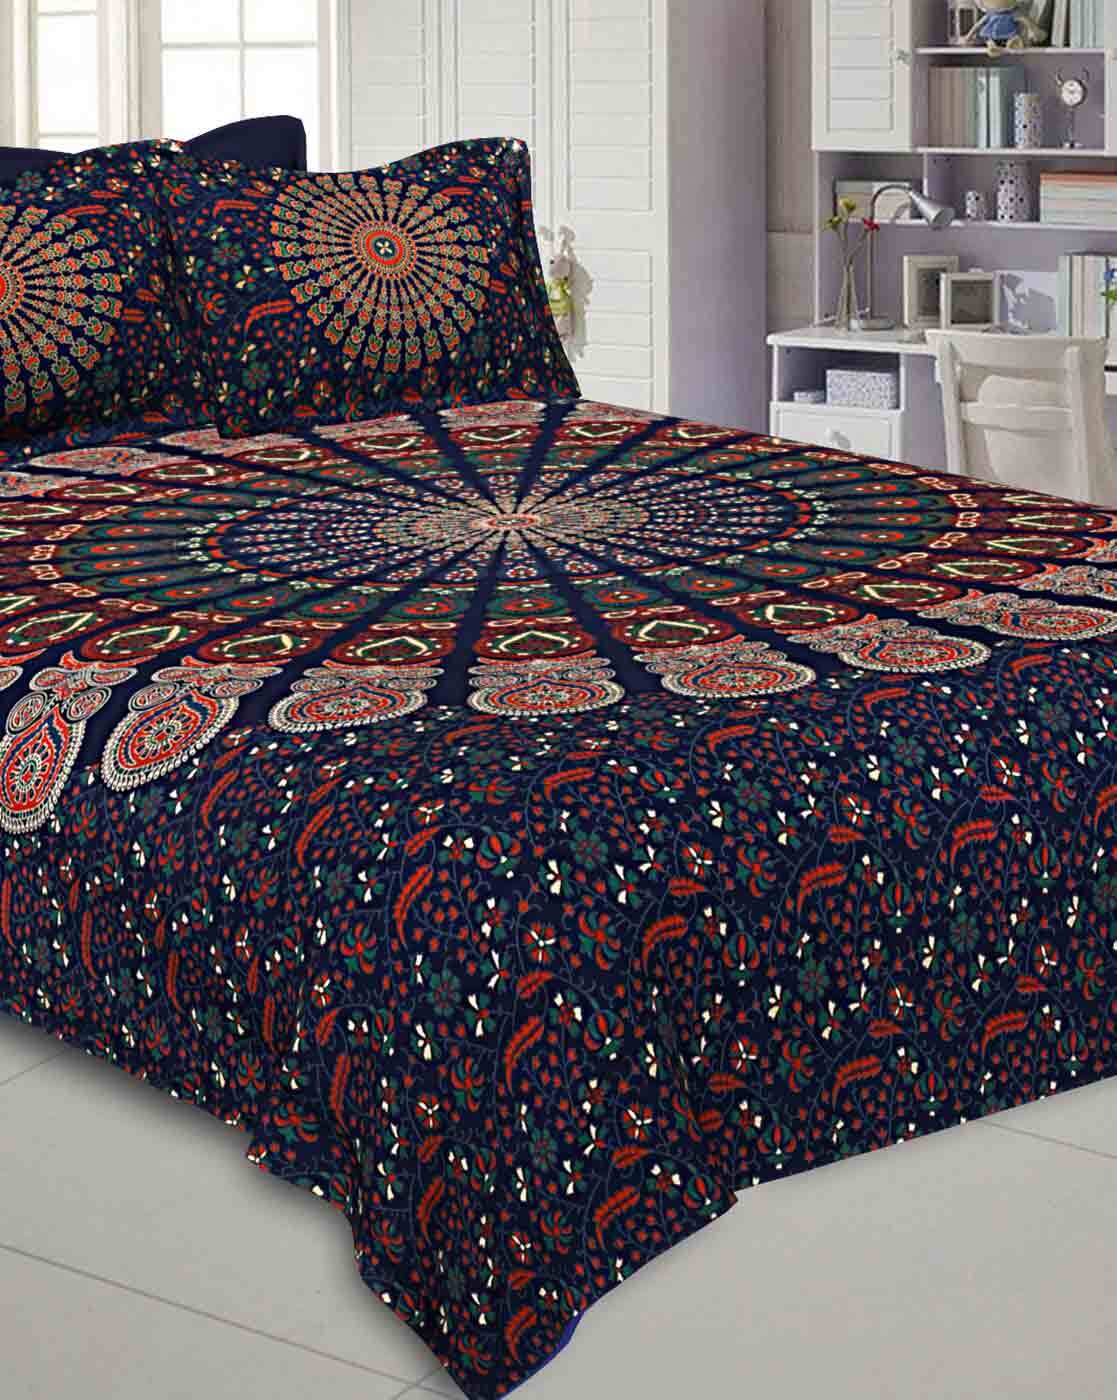 Buy Blue Bedsheets for Home & Kitchen by Jaipur Fabric Online ...